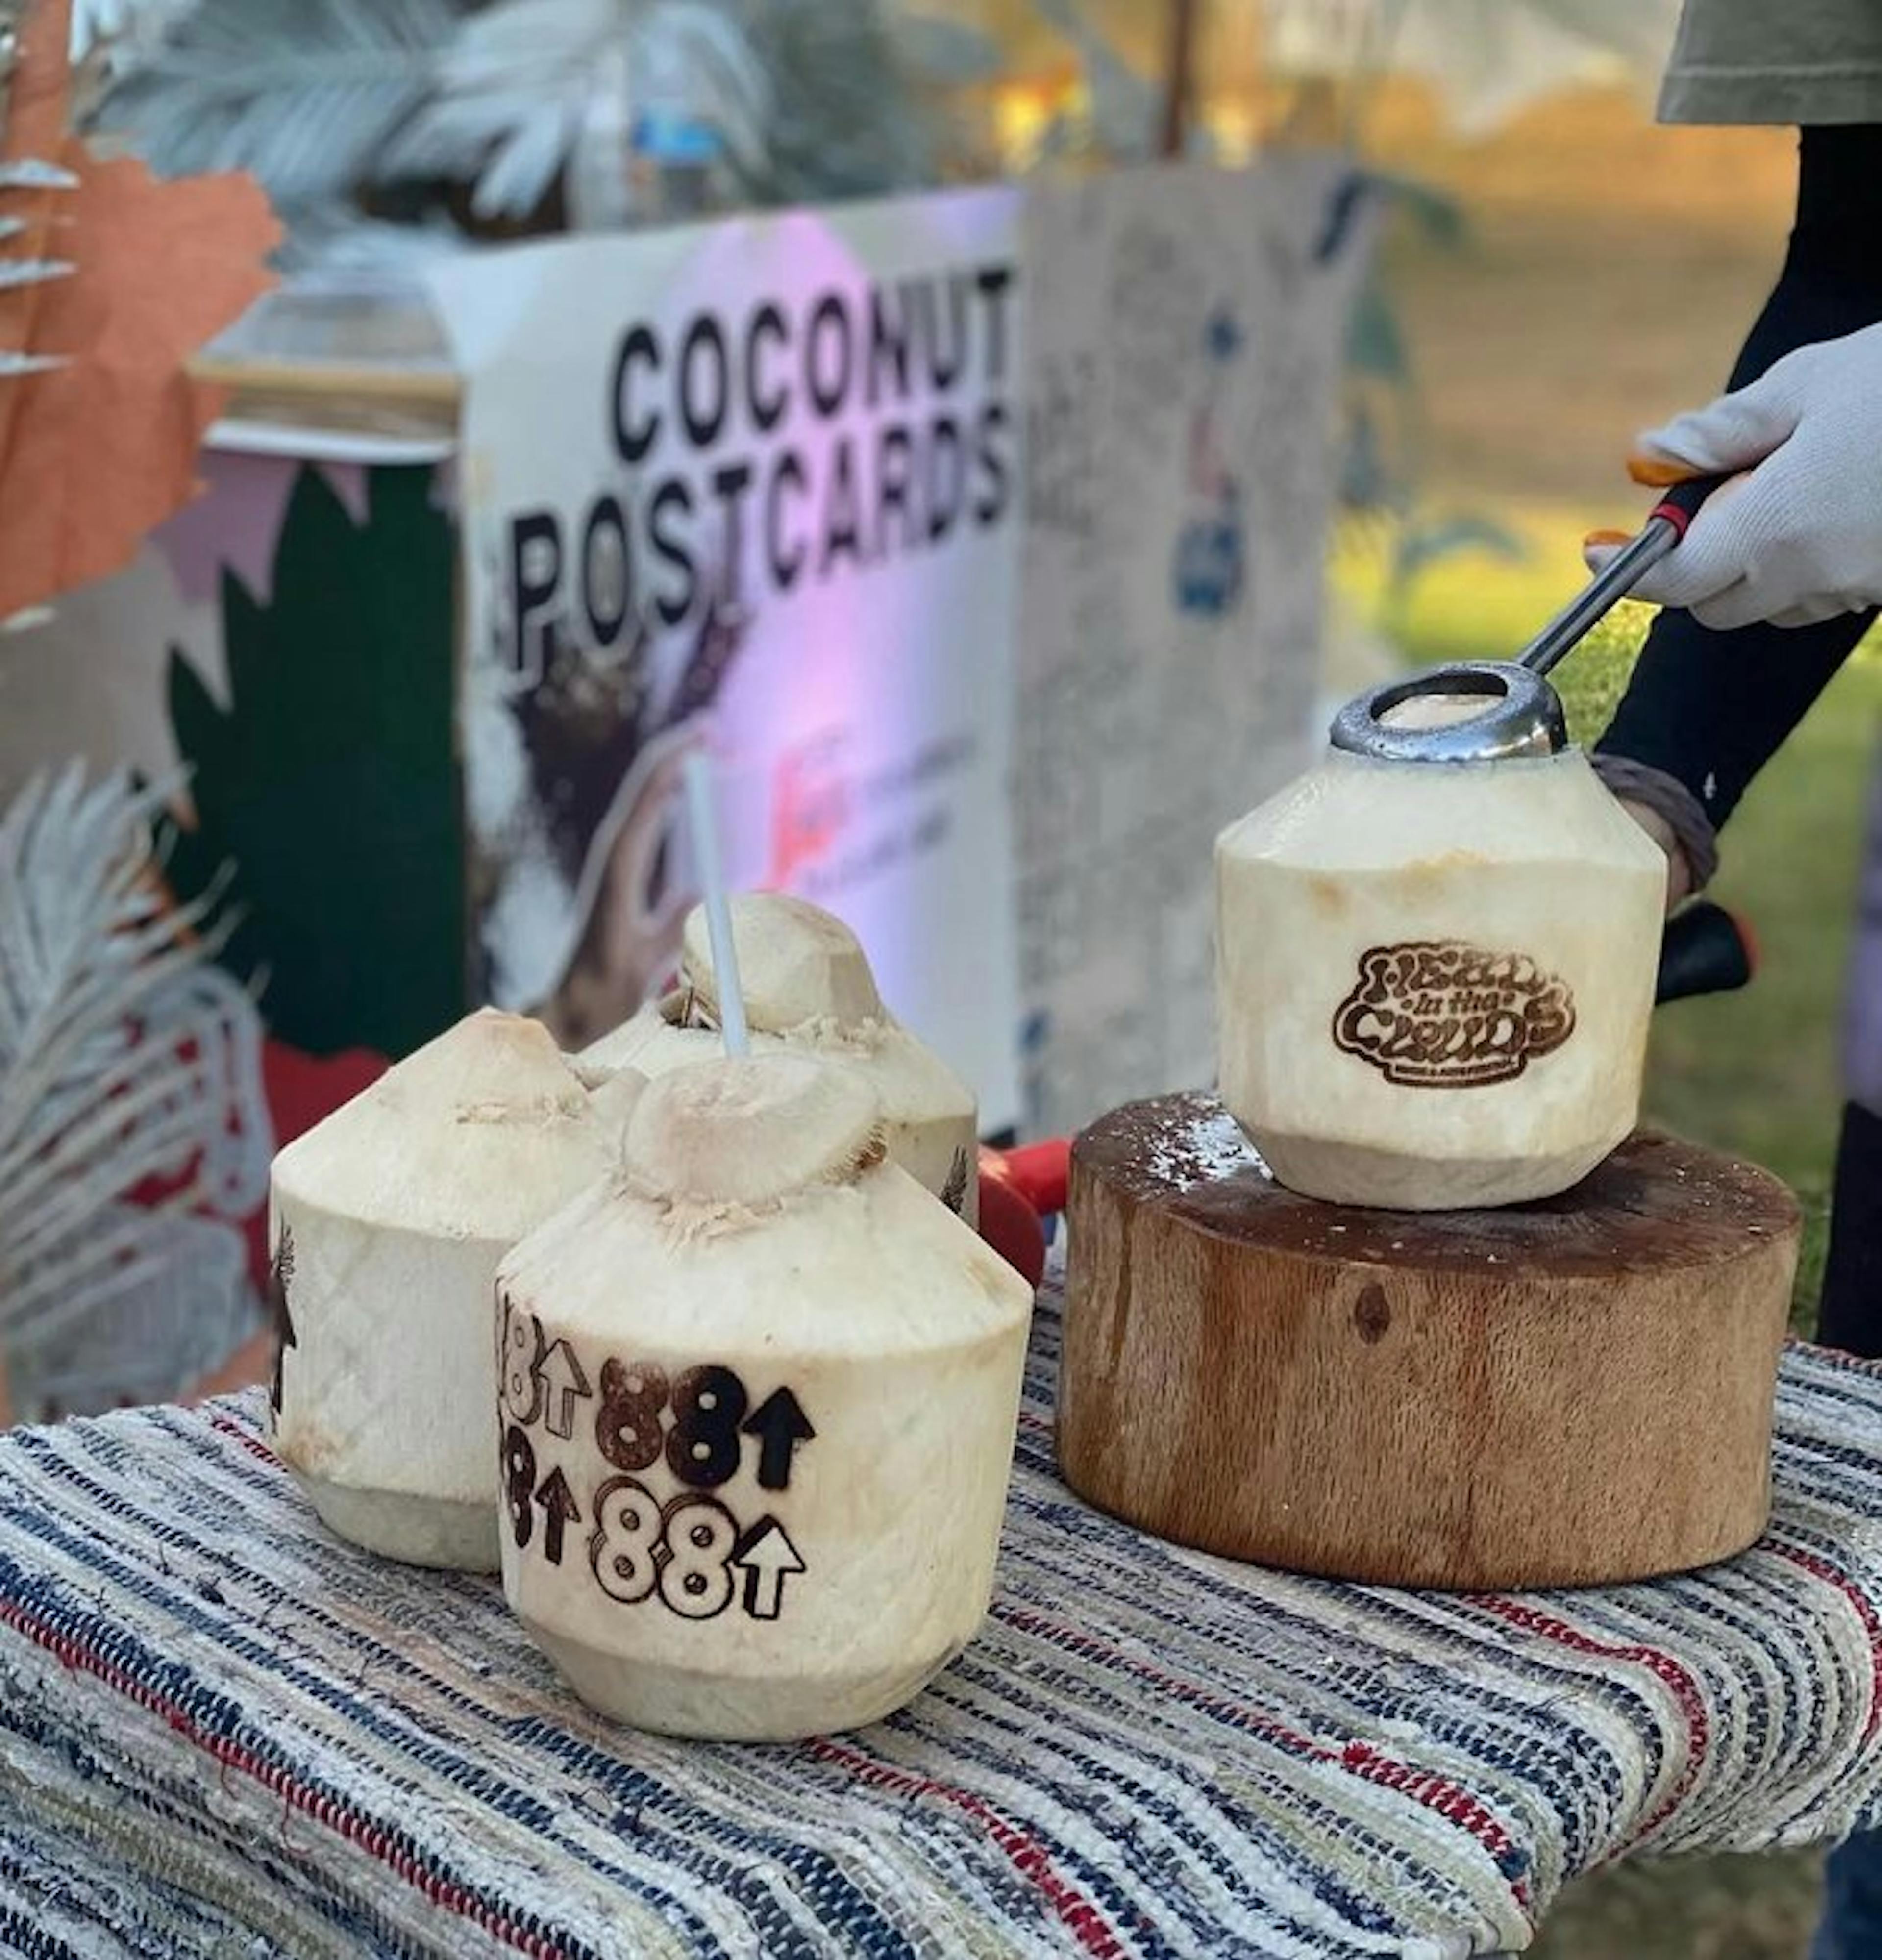 An inviting festival scene featuring fresh coconuts being prepared at the Head In The Clouds festival. Three coconuts are prominently displayed, each branded with the 88rising logo, and one is being opened with a tool by a person wearing white gloves. In the background, a sign reads 'Coconut Postcards,' suggesting an interactive festival experience. The setting is outdoors, with hints of a festival atmosphere suggested by the presence of various flags and decorations in soft focus behind the coconuts.